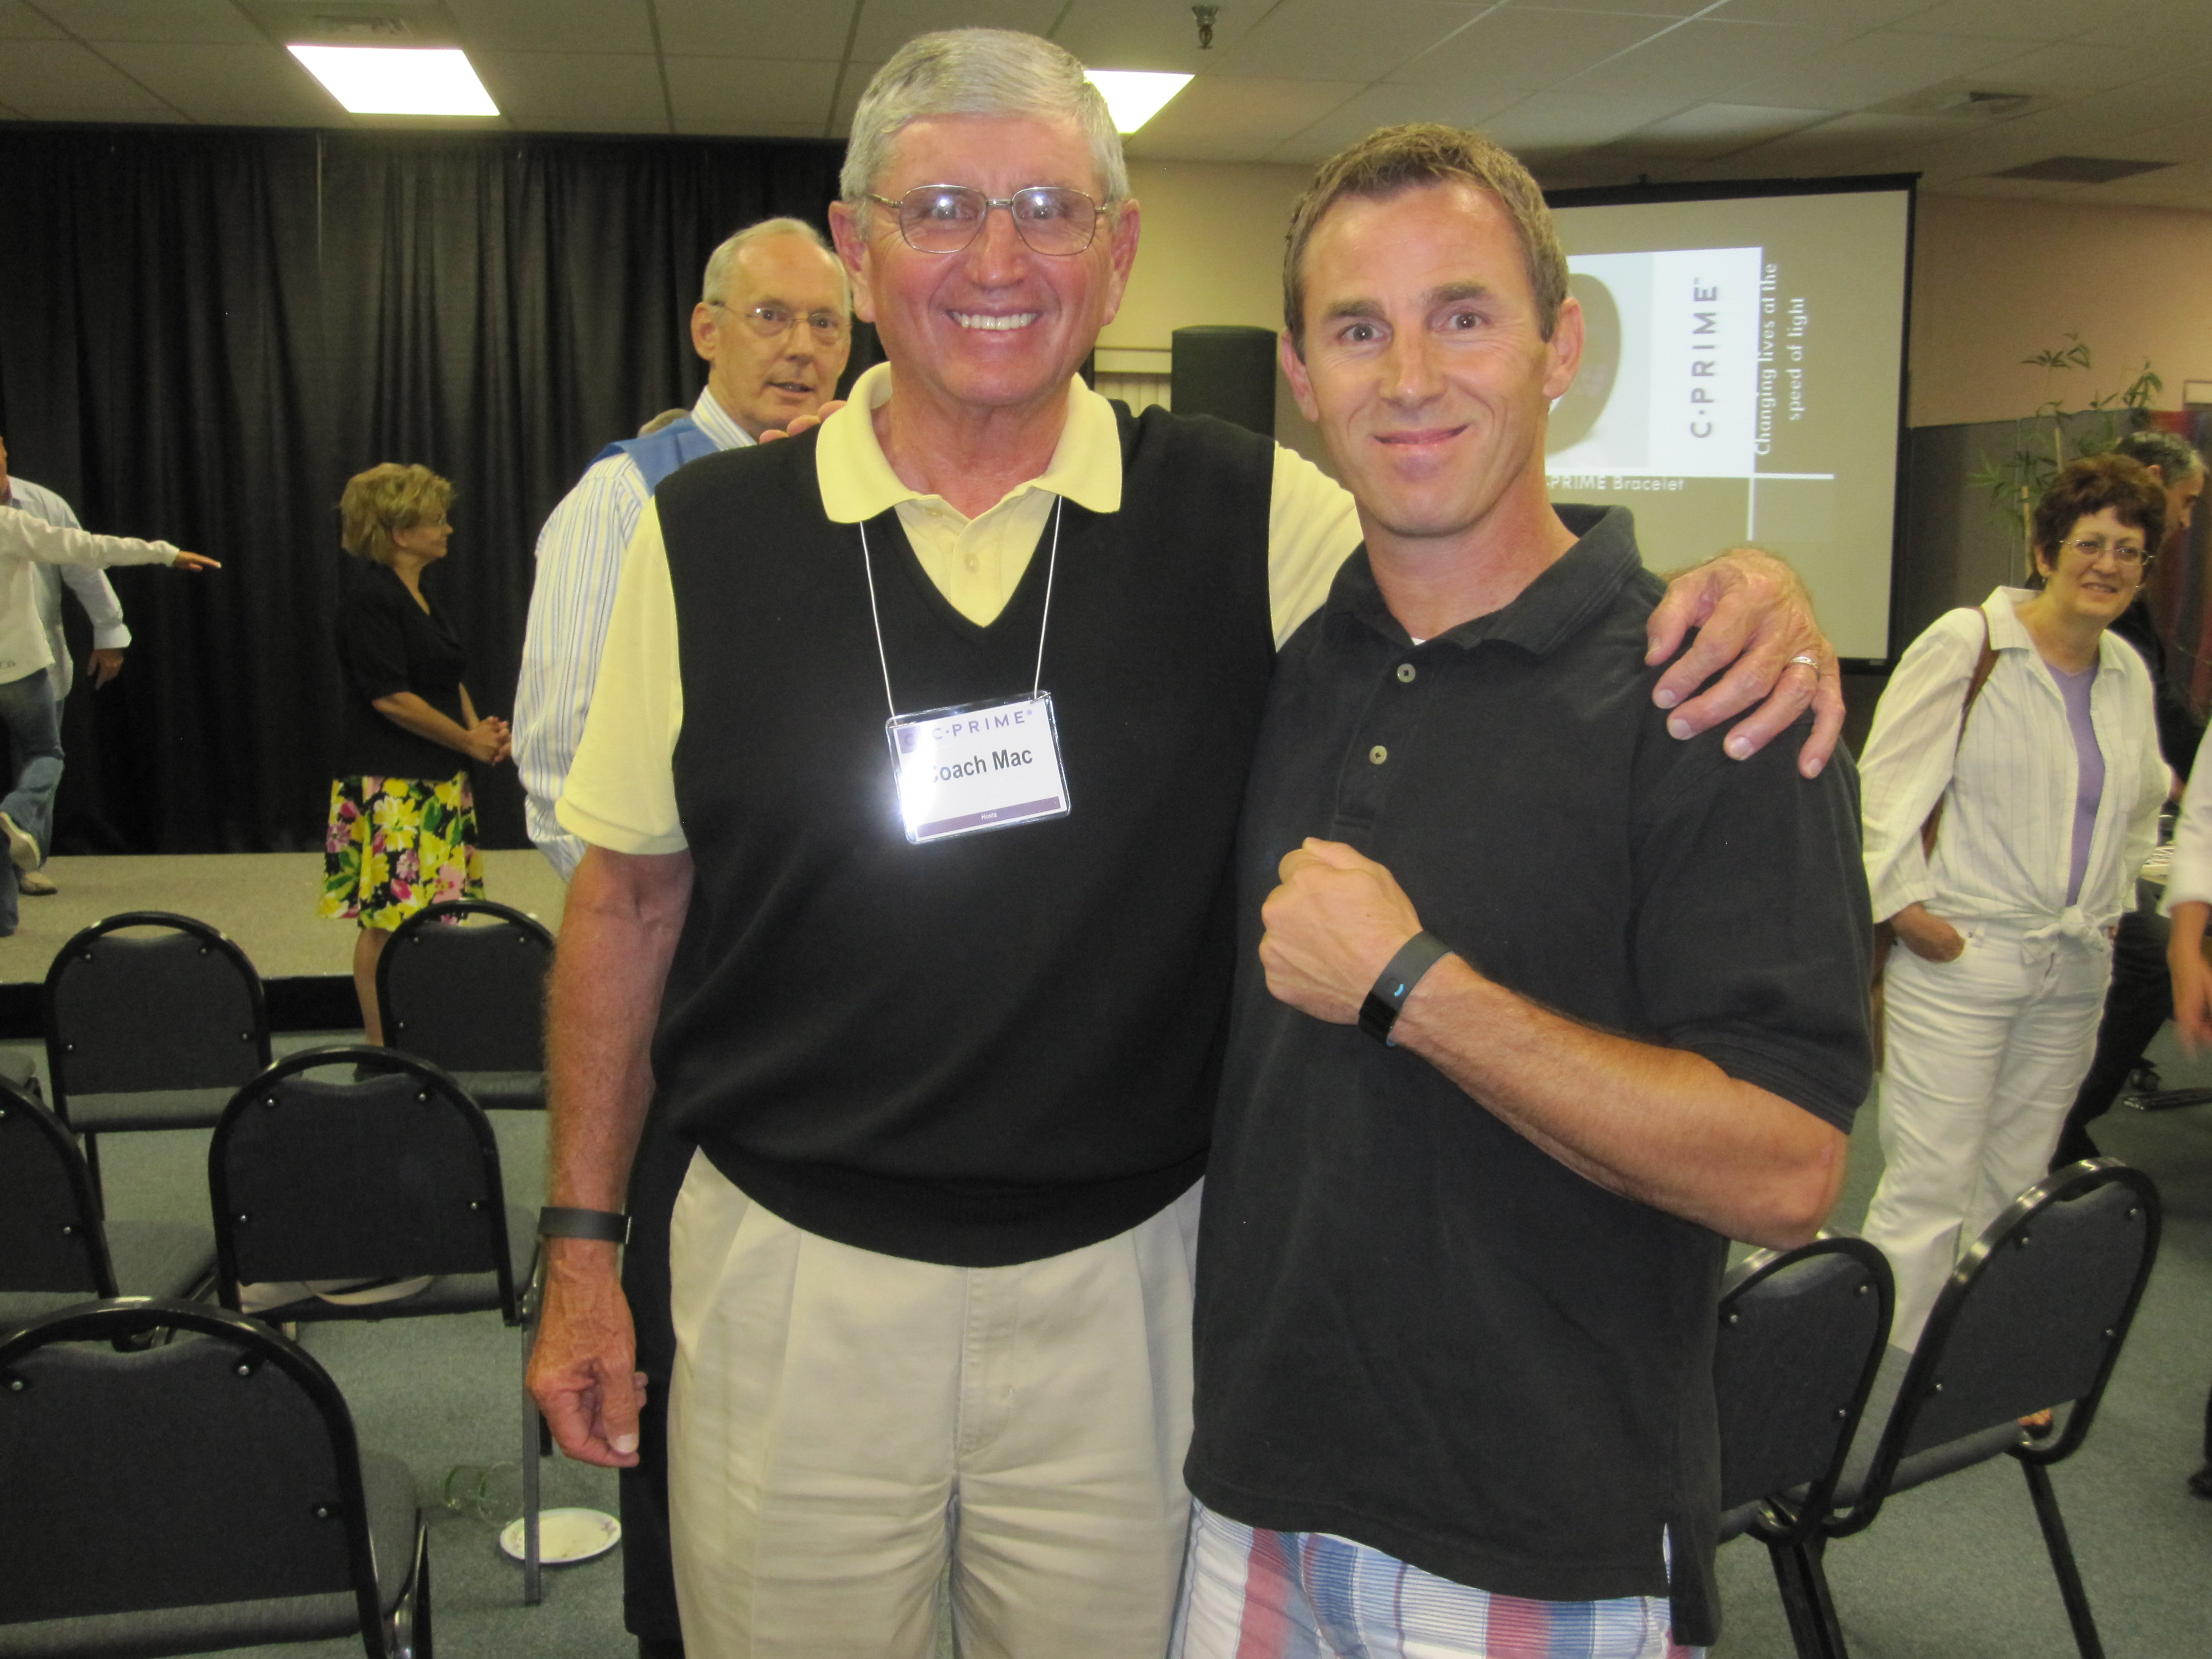 coach-bill-mccartney-former-american-football-player-founder-of-promise-keepers-mens-ministry-and-former-head-coach-at-university-of-colorado-wears-cprime-1.jpg